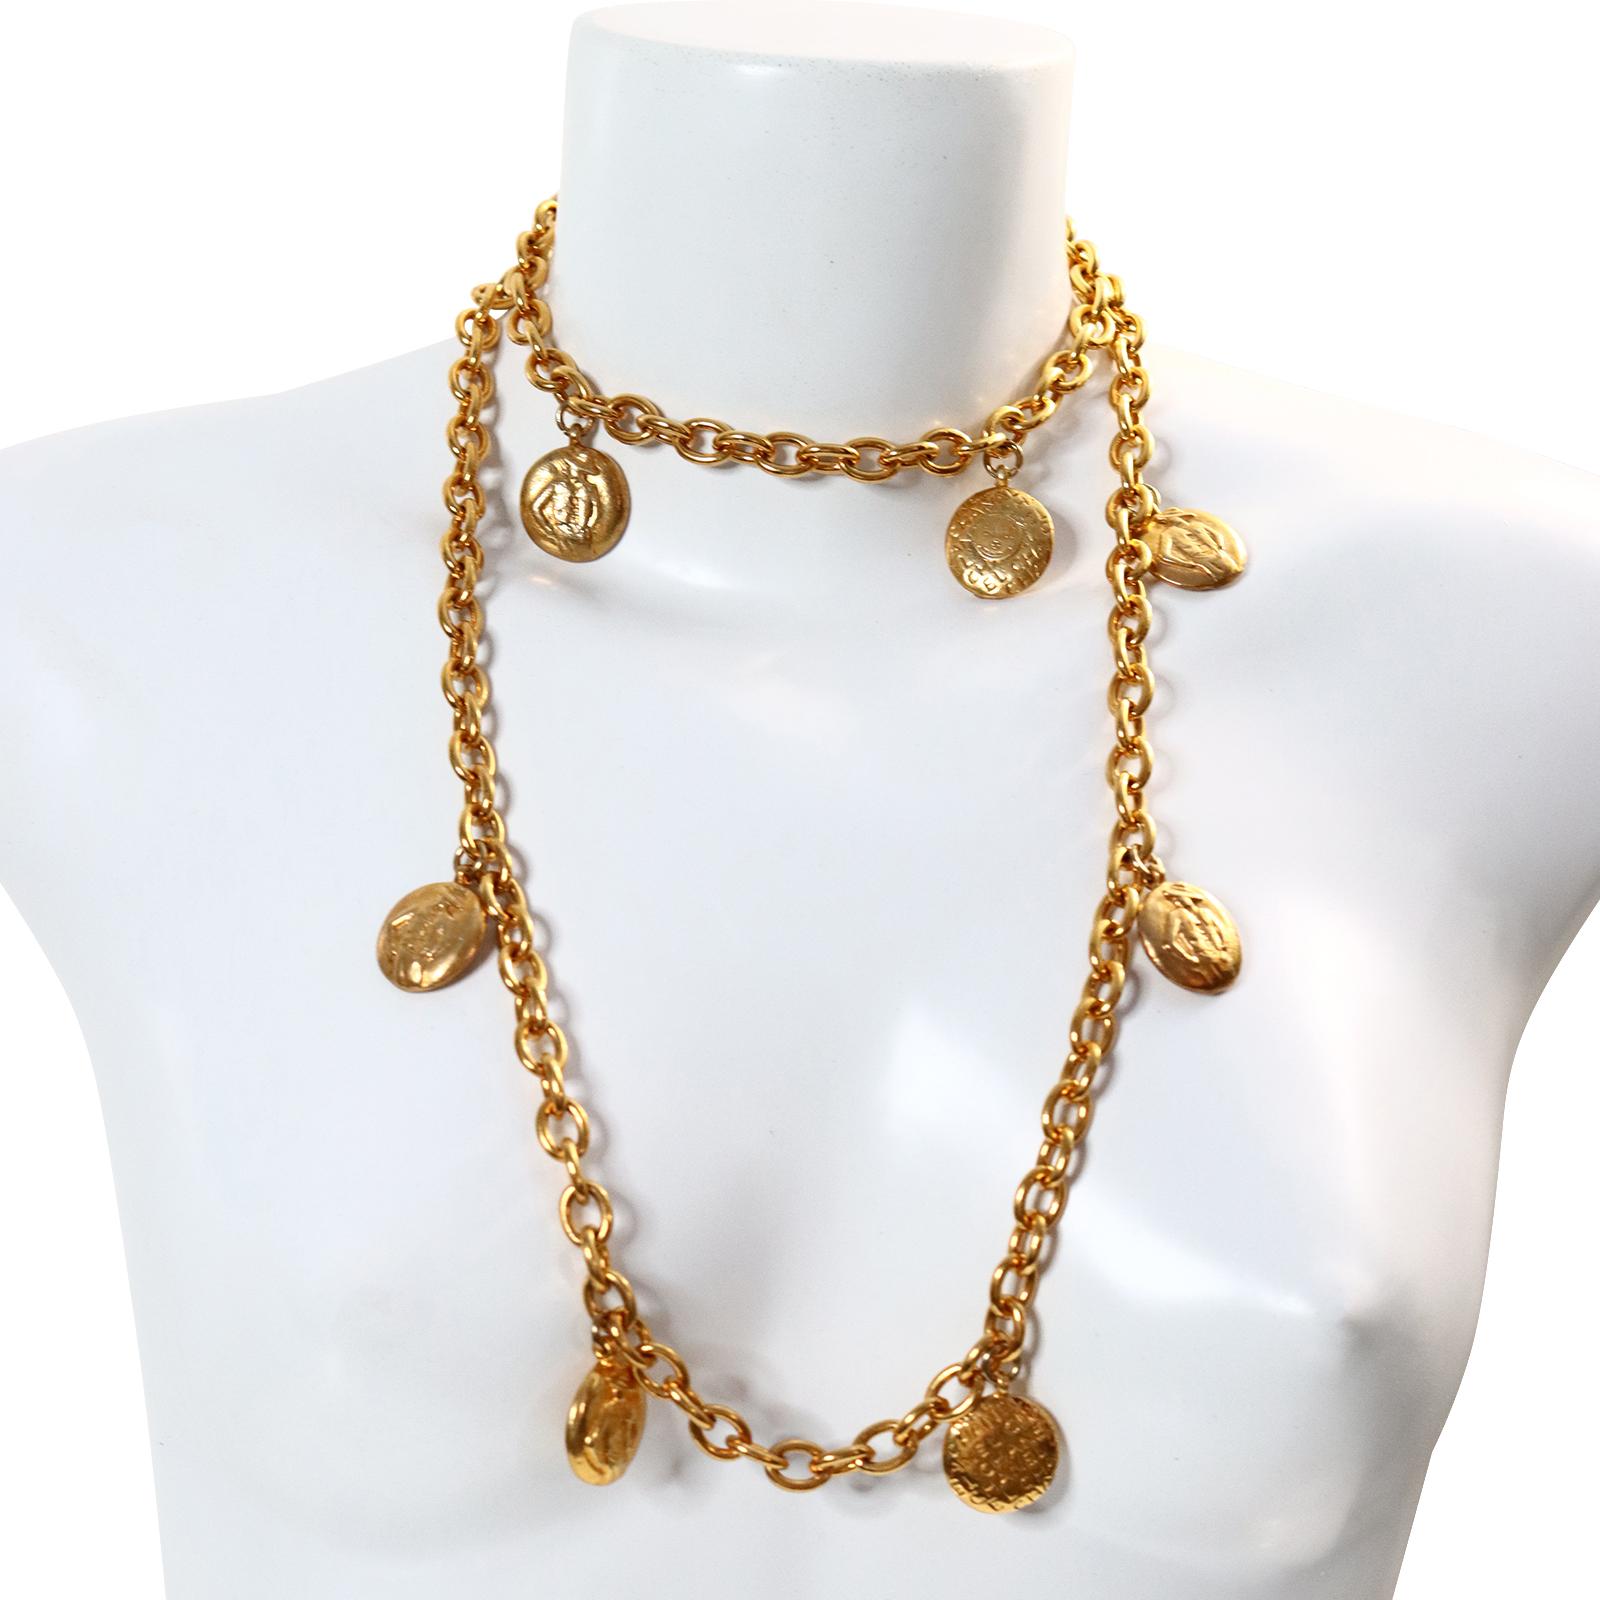 Artist Vintage Chanel Gold Disc Chanel and Coco on Long Necklace Circa 1980s For Sale